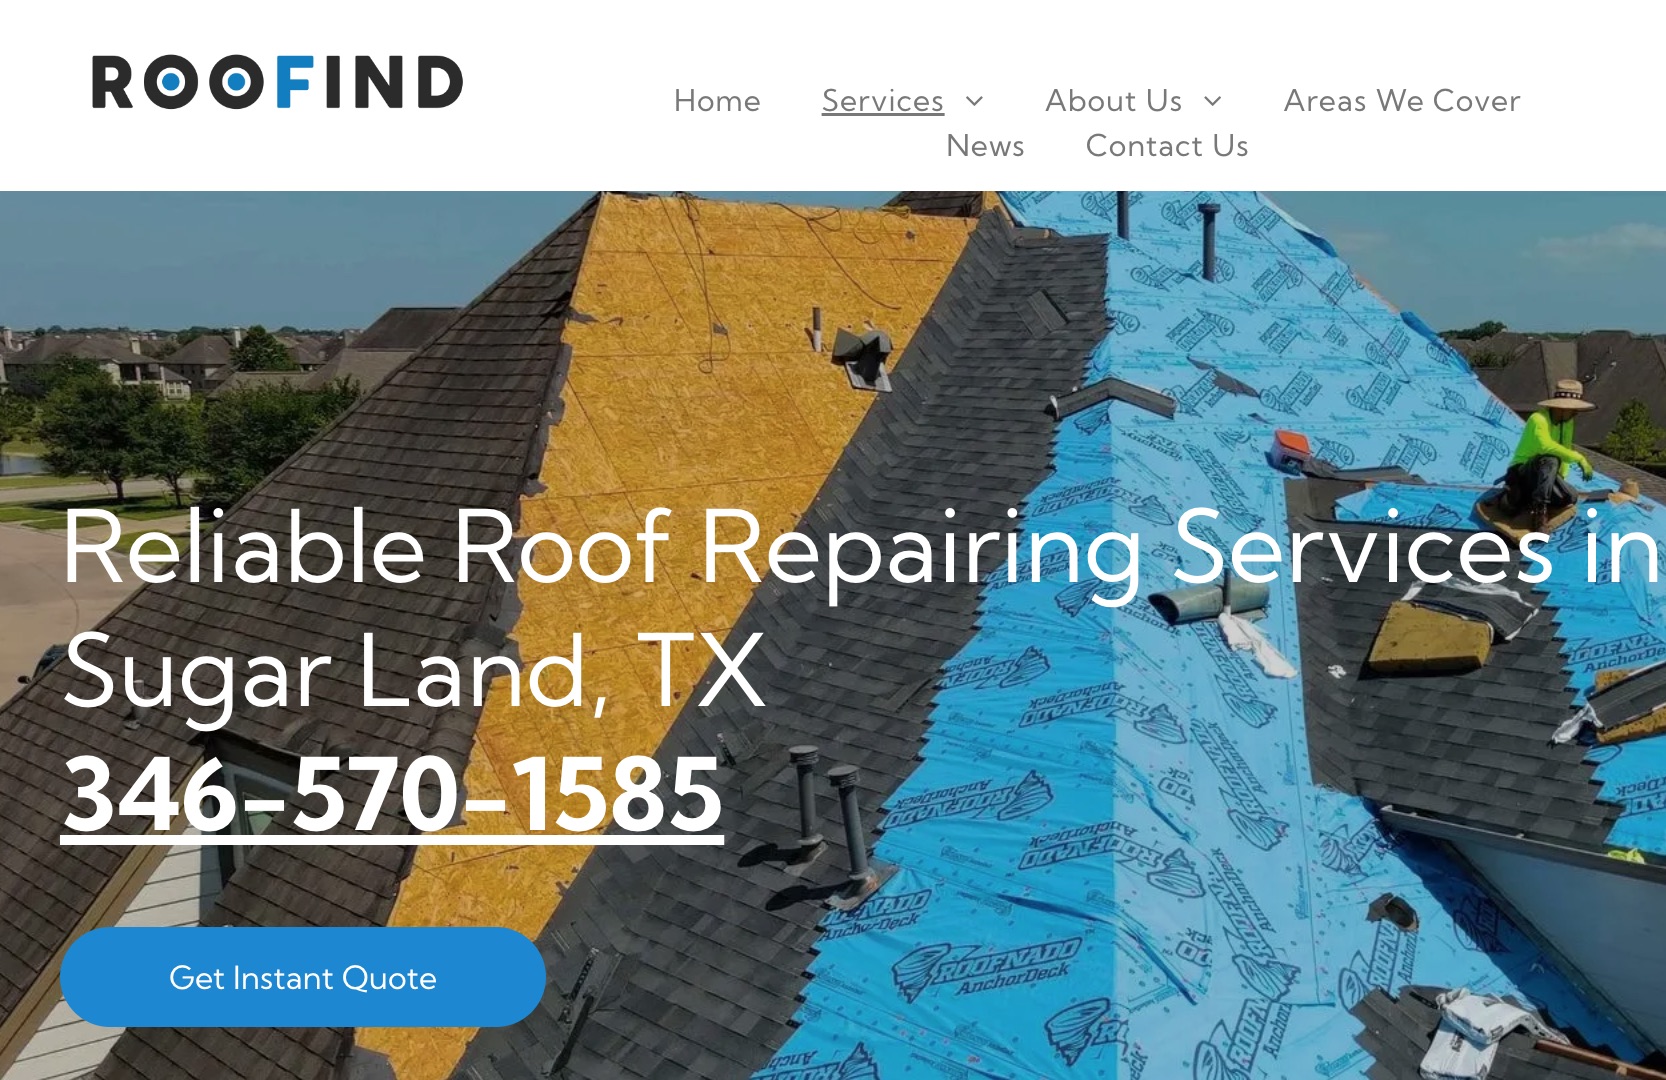 Houston’s Roofing Elite: Roofind’s Journey to the Top